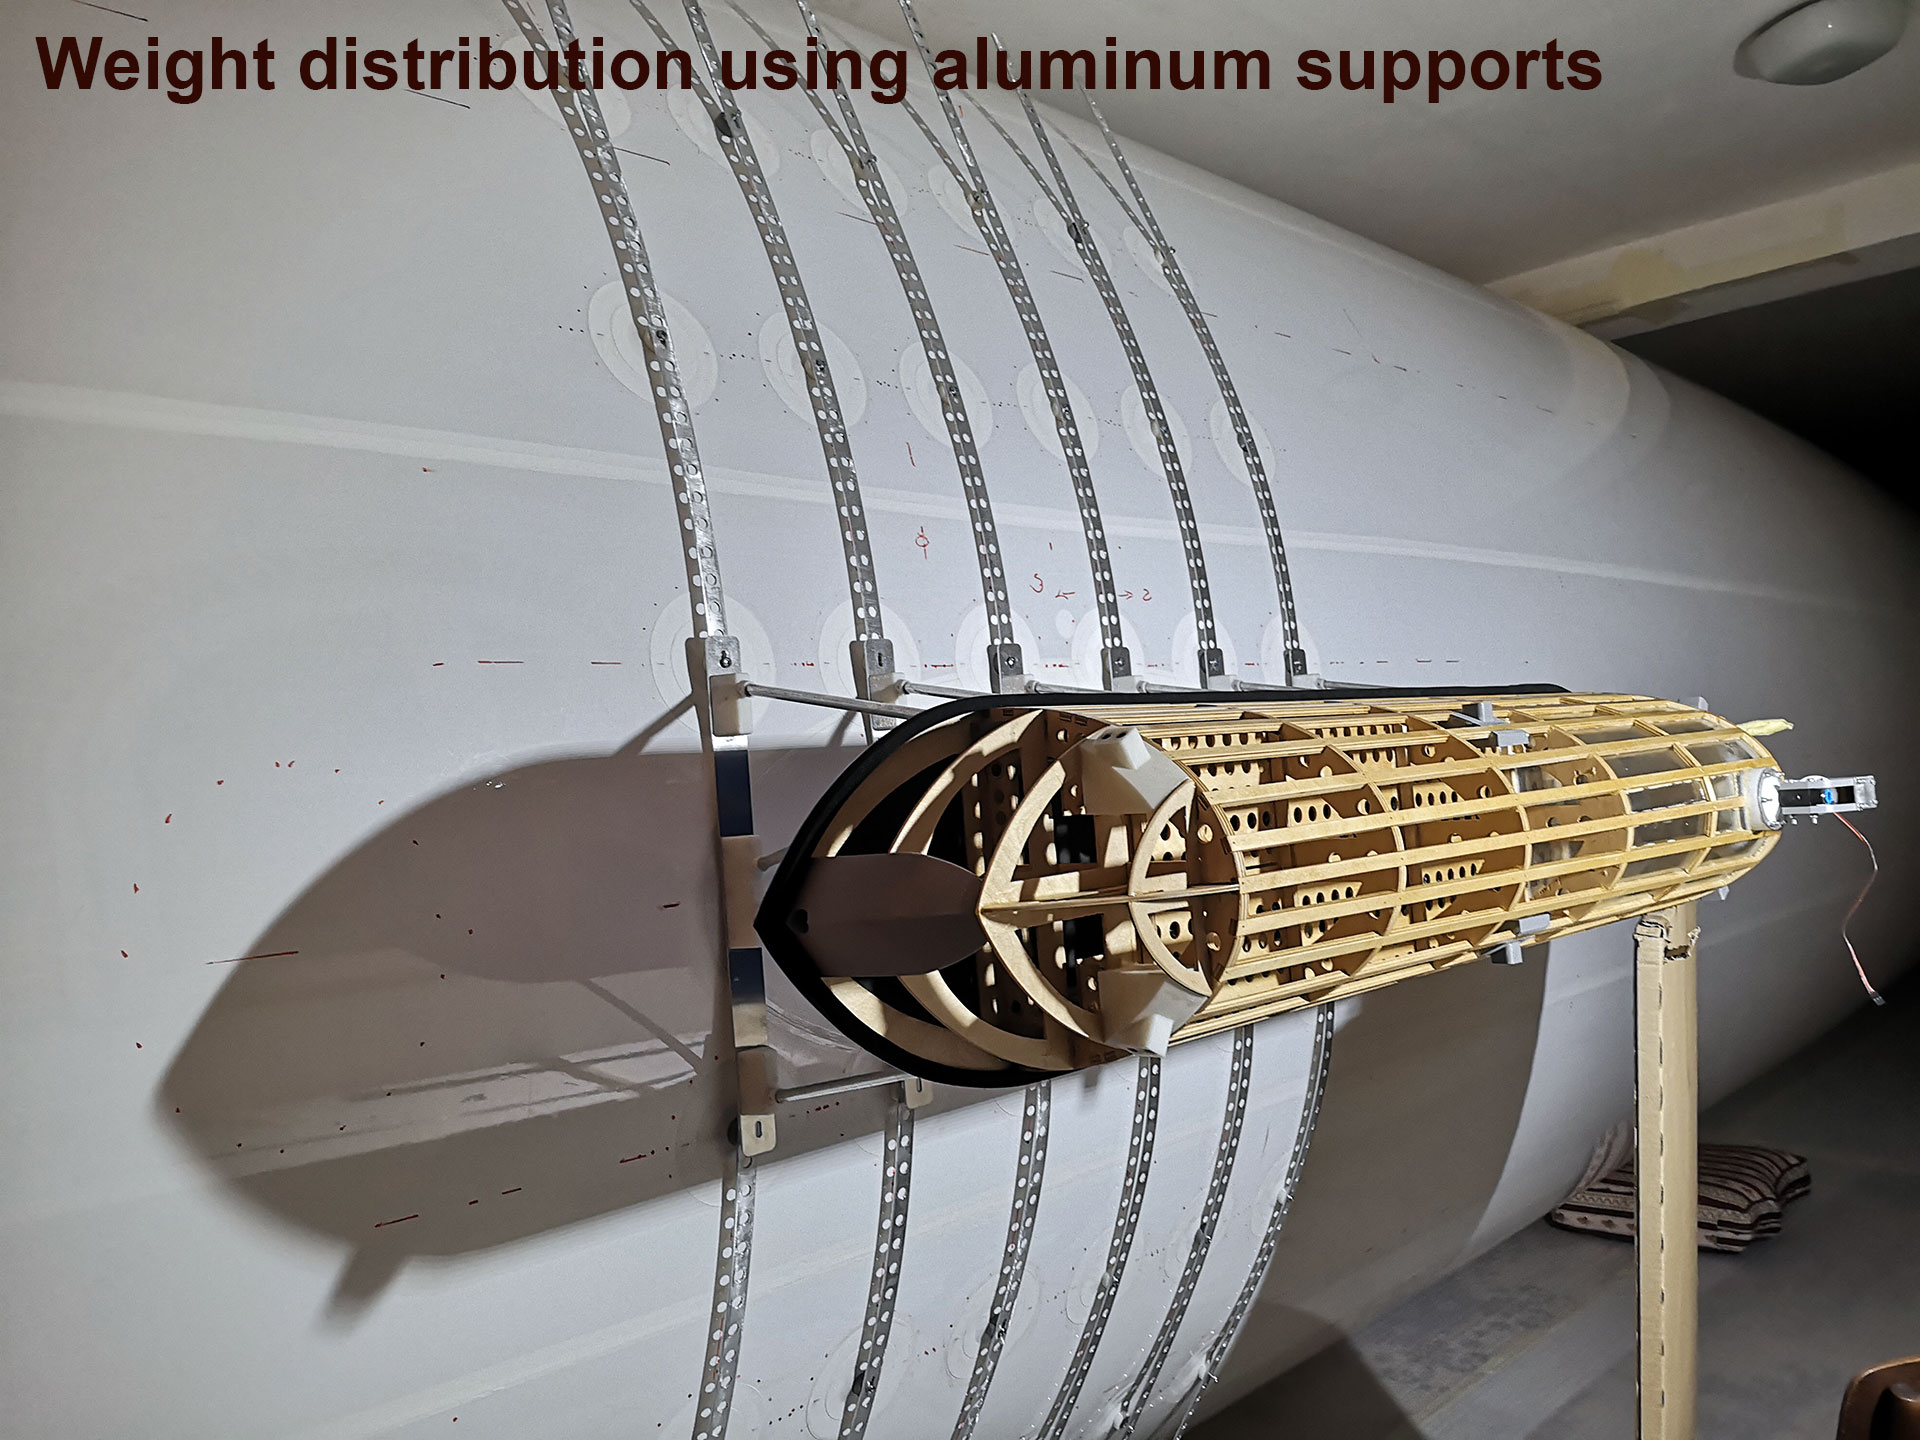 Weight-distribution-using-aluminum-supports